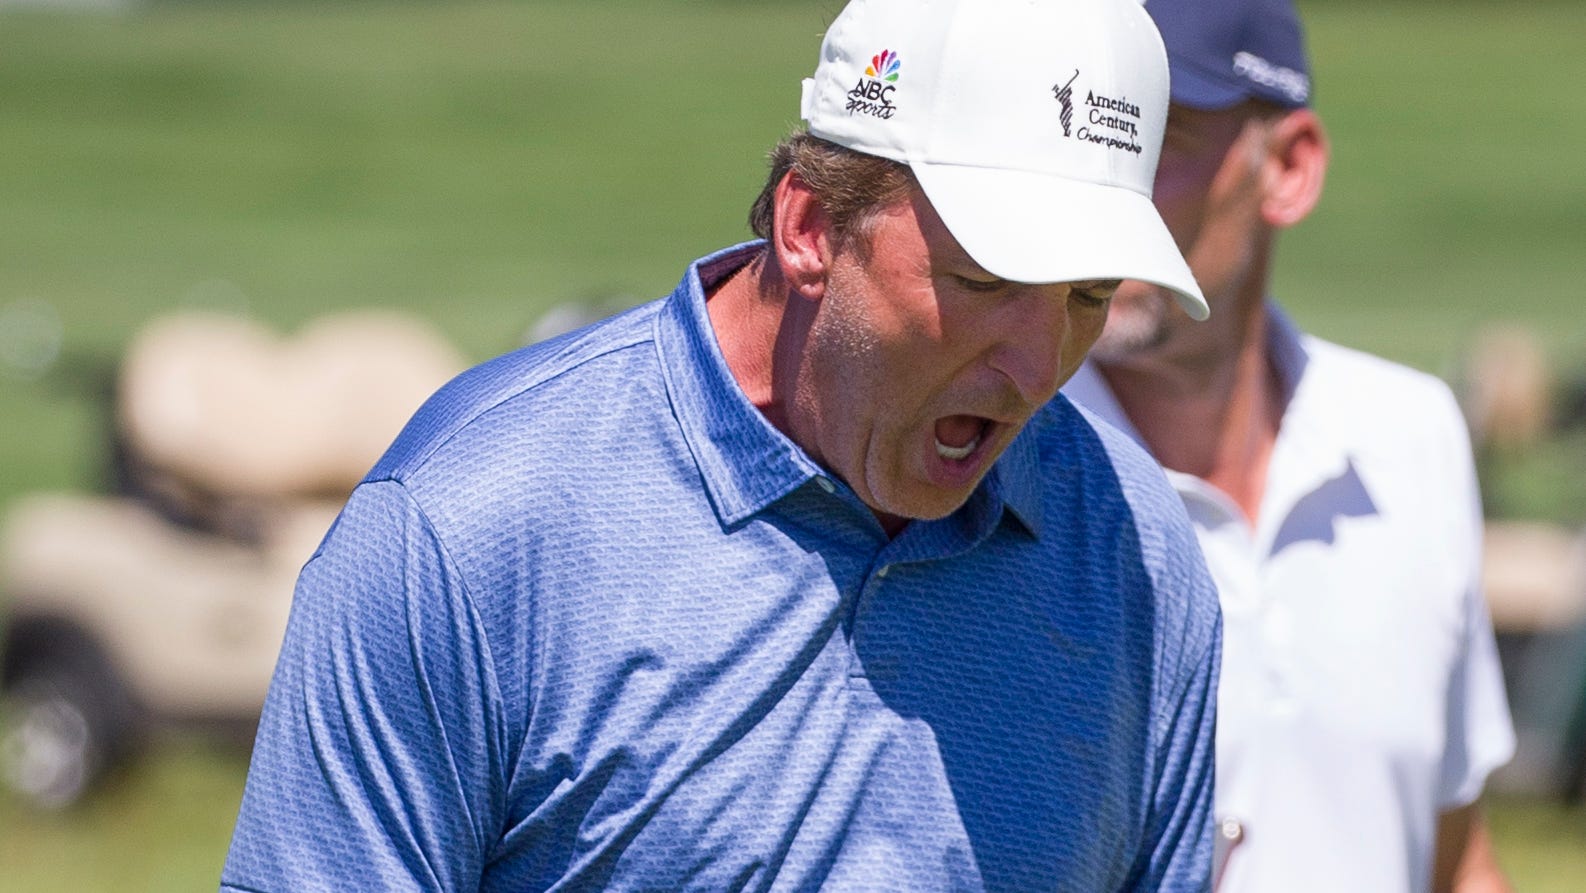 Celebrity Golf: Emotional Del Negro wins ACC for father, downs Smoltz in sudden death playoff